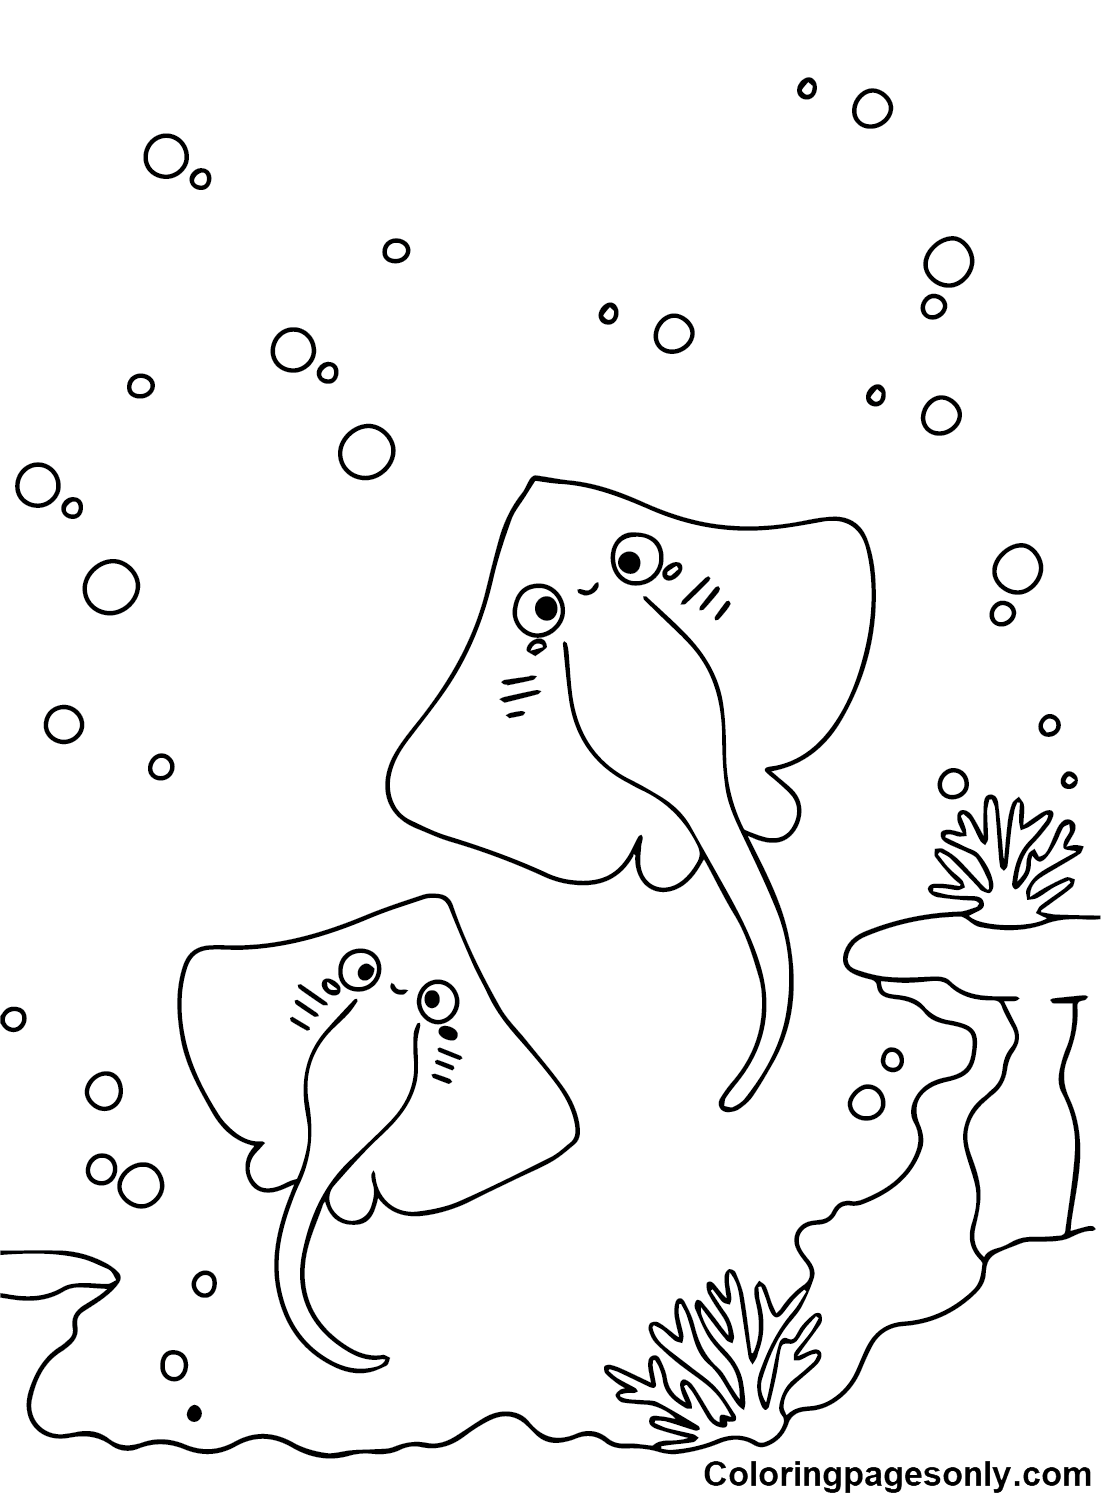 Stingray coloring pages printable for free download